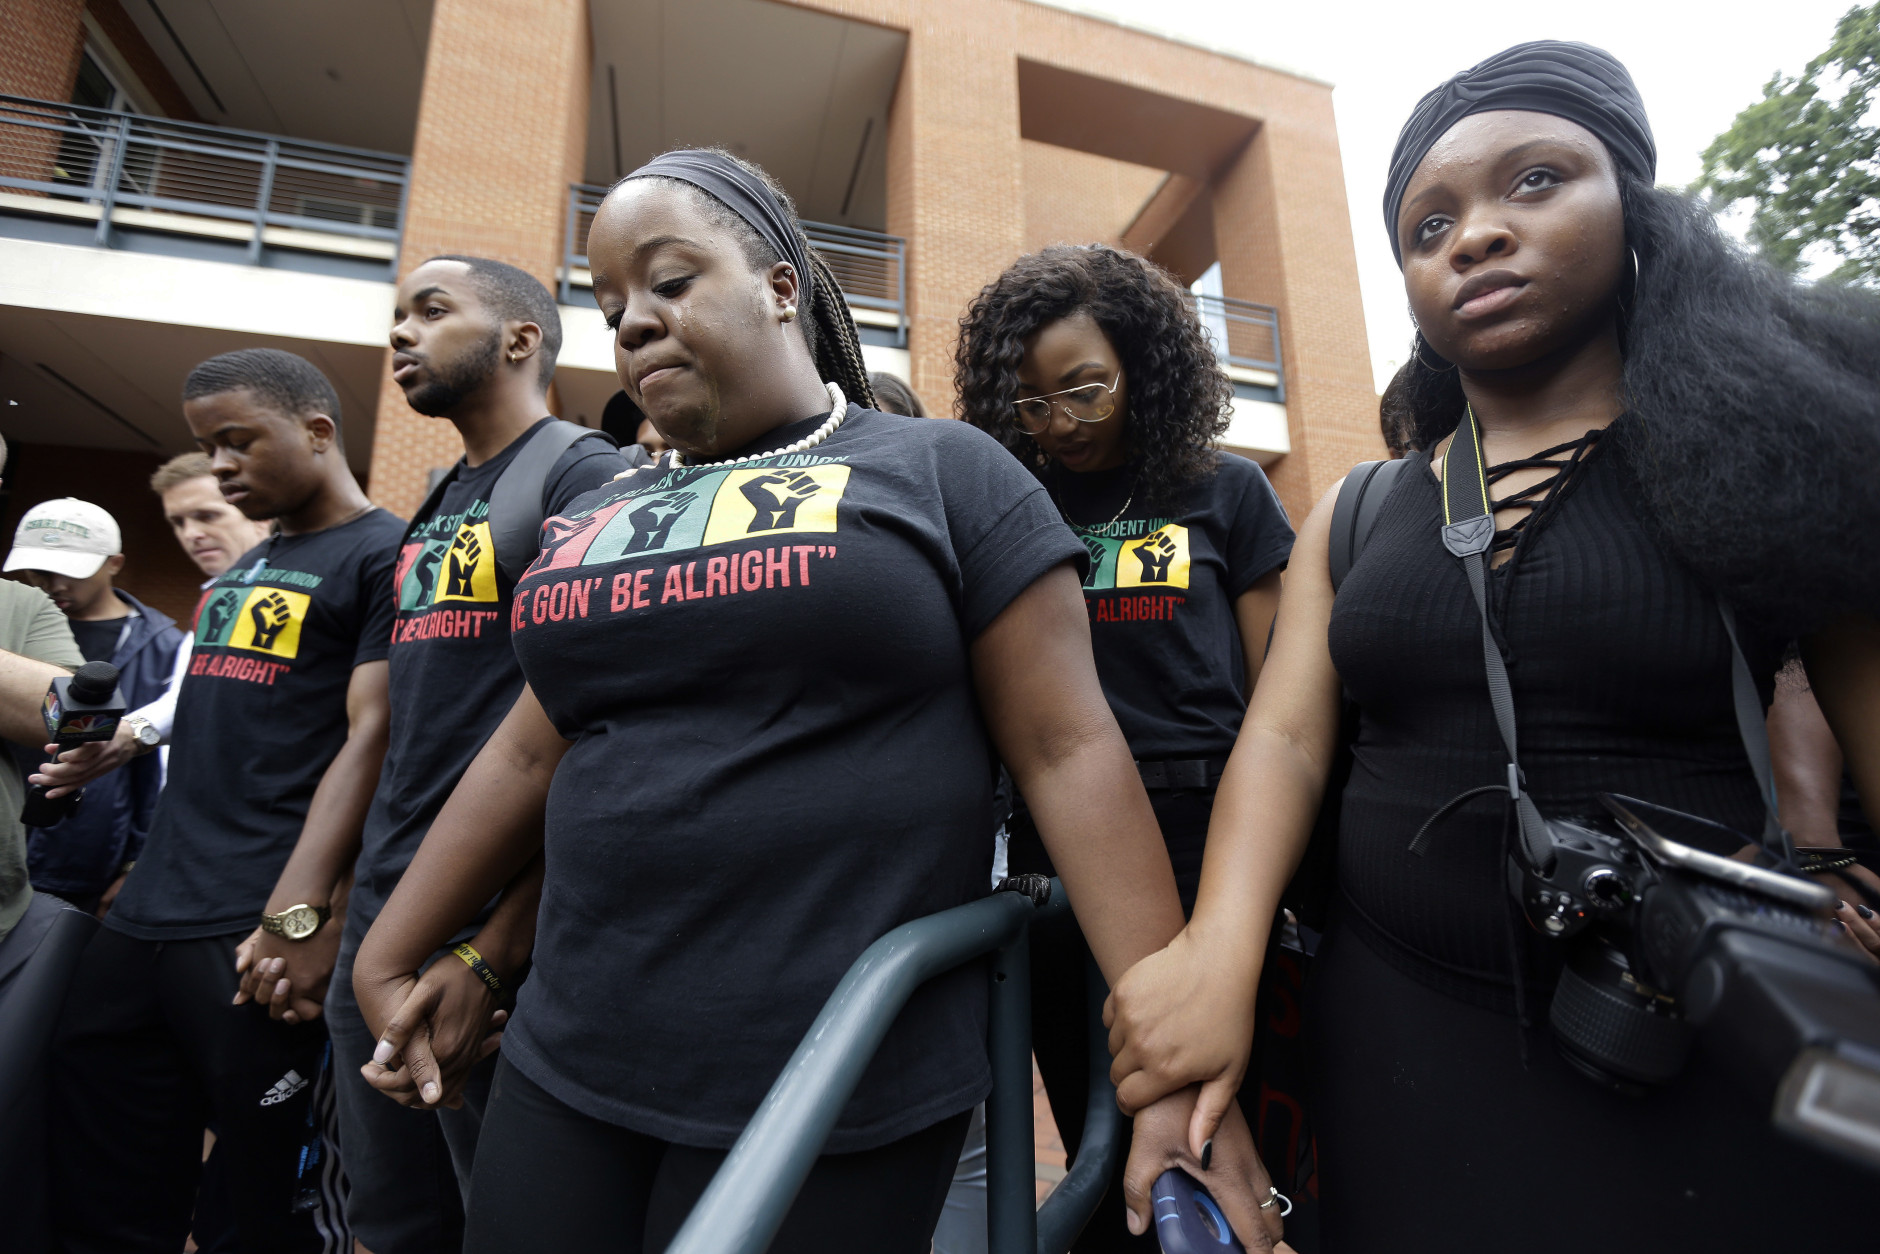 Robbie Miller, center, cries as she and fellow students at the University of North Carolina Charlotte hold a vigil following Tuesday's police shooting of Keith Lamont Scott at The Village at College Downs apartment complex in Charlotte, N.C., Wednesday, Sept. 21, 2016. (AP Photo/Gerry Broome)